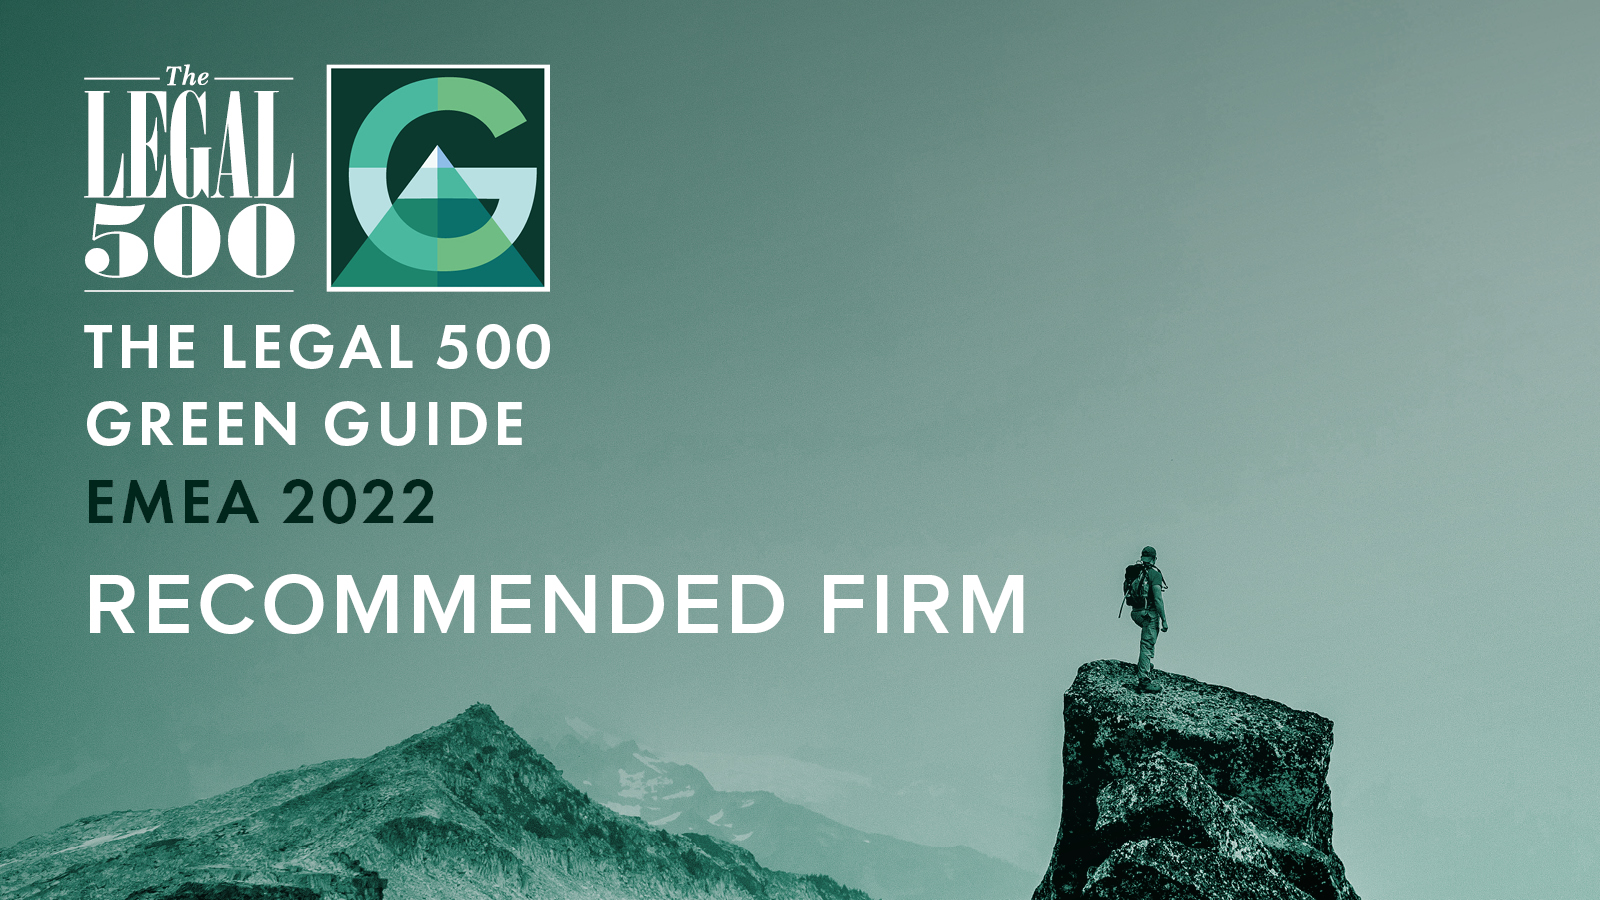 Garrigues featured in The Legal 500 Global Green Guide for its contribution to the green transition